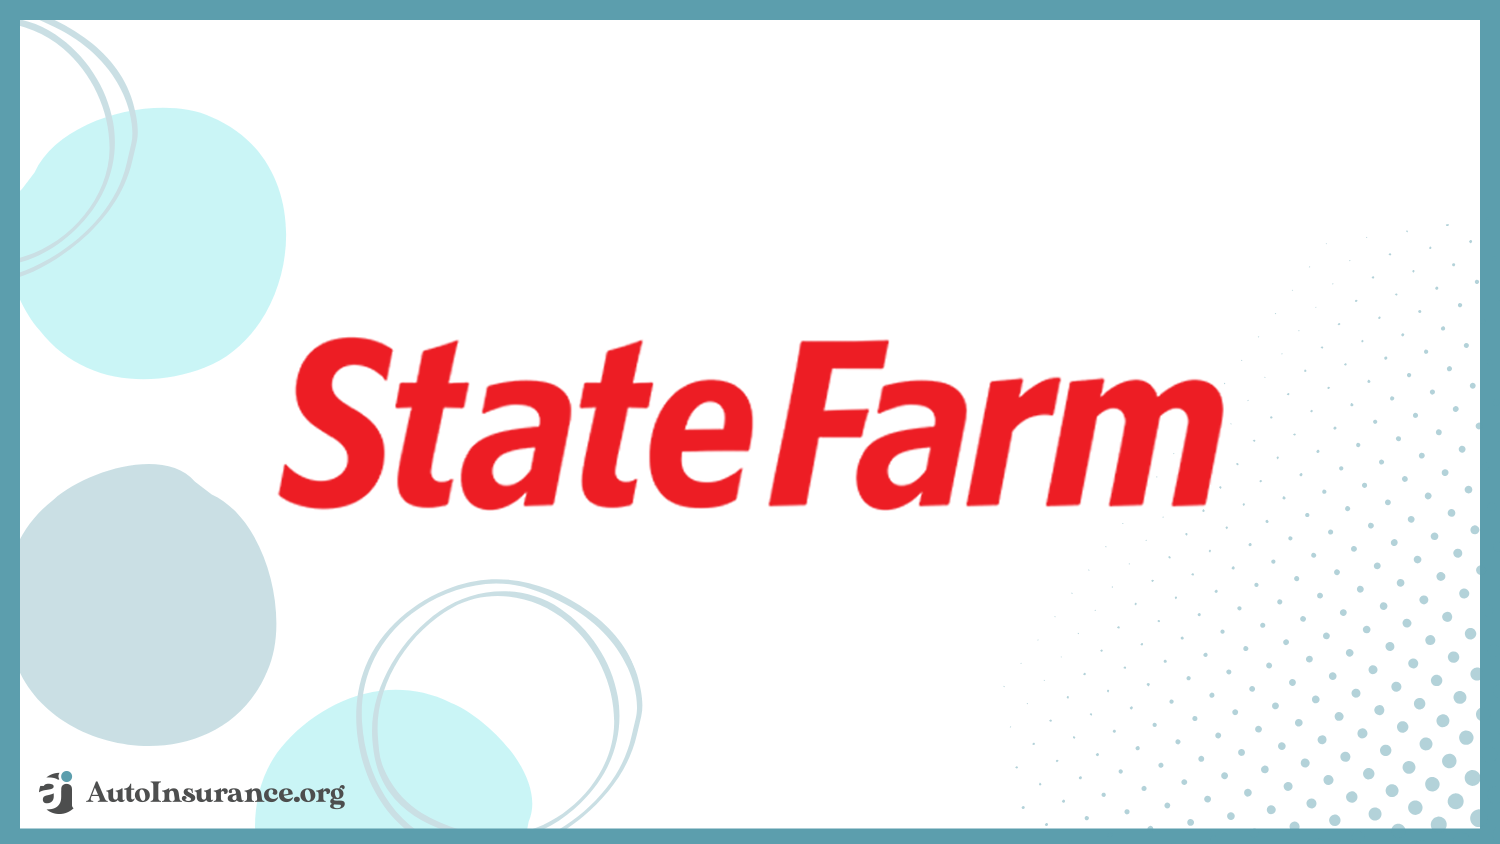 State Farm: Best Auto Insurance Companies for High-Risk Drivers